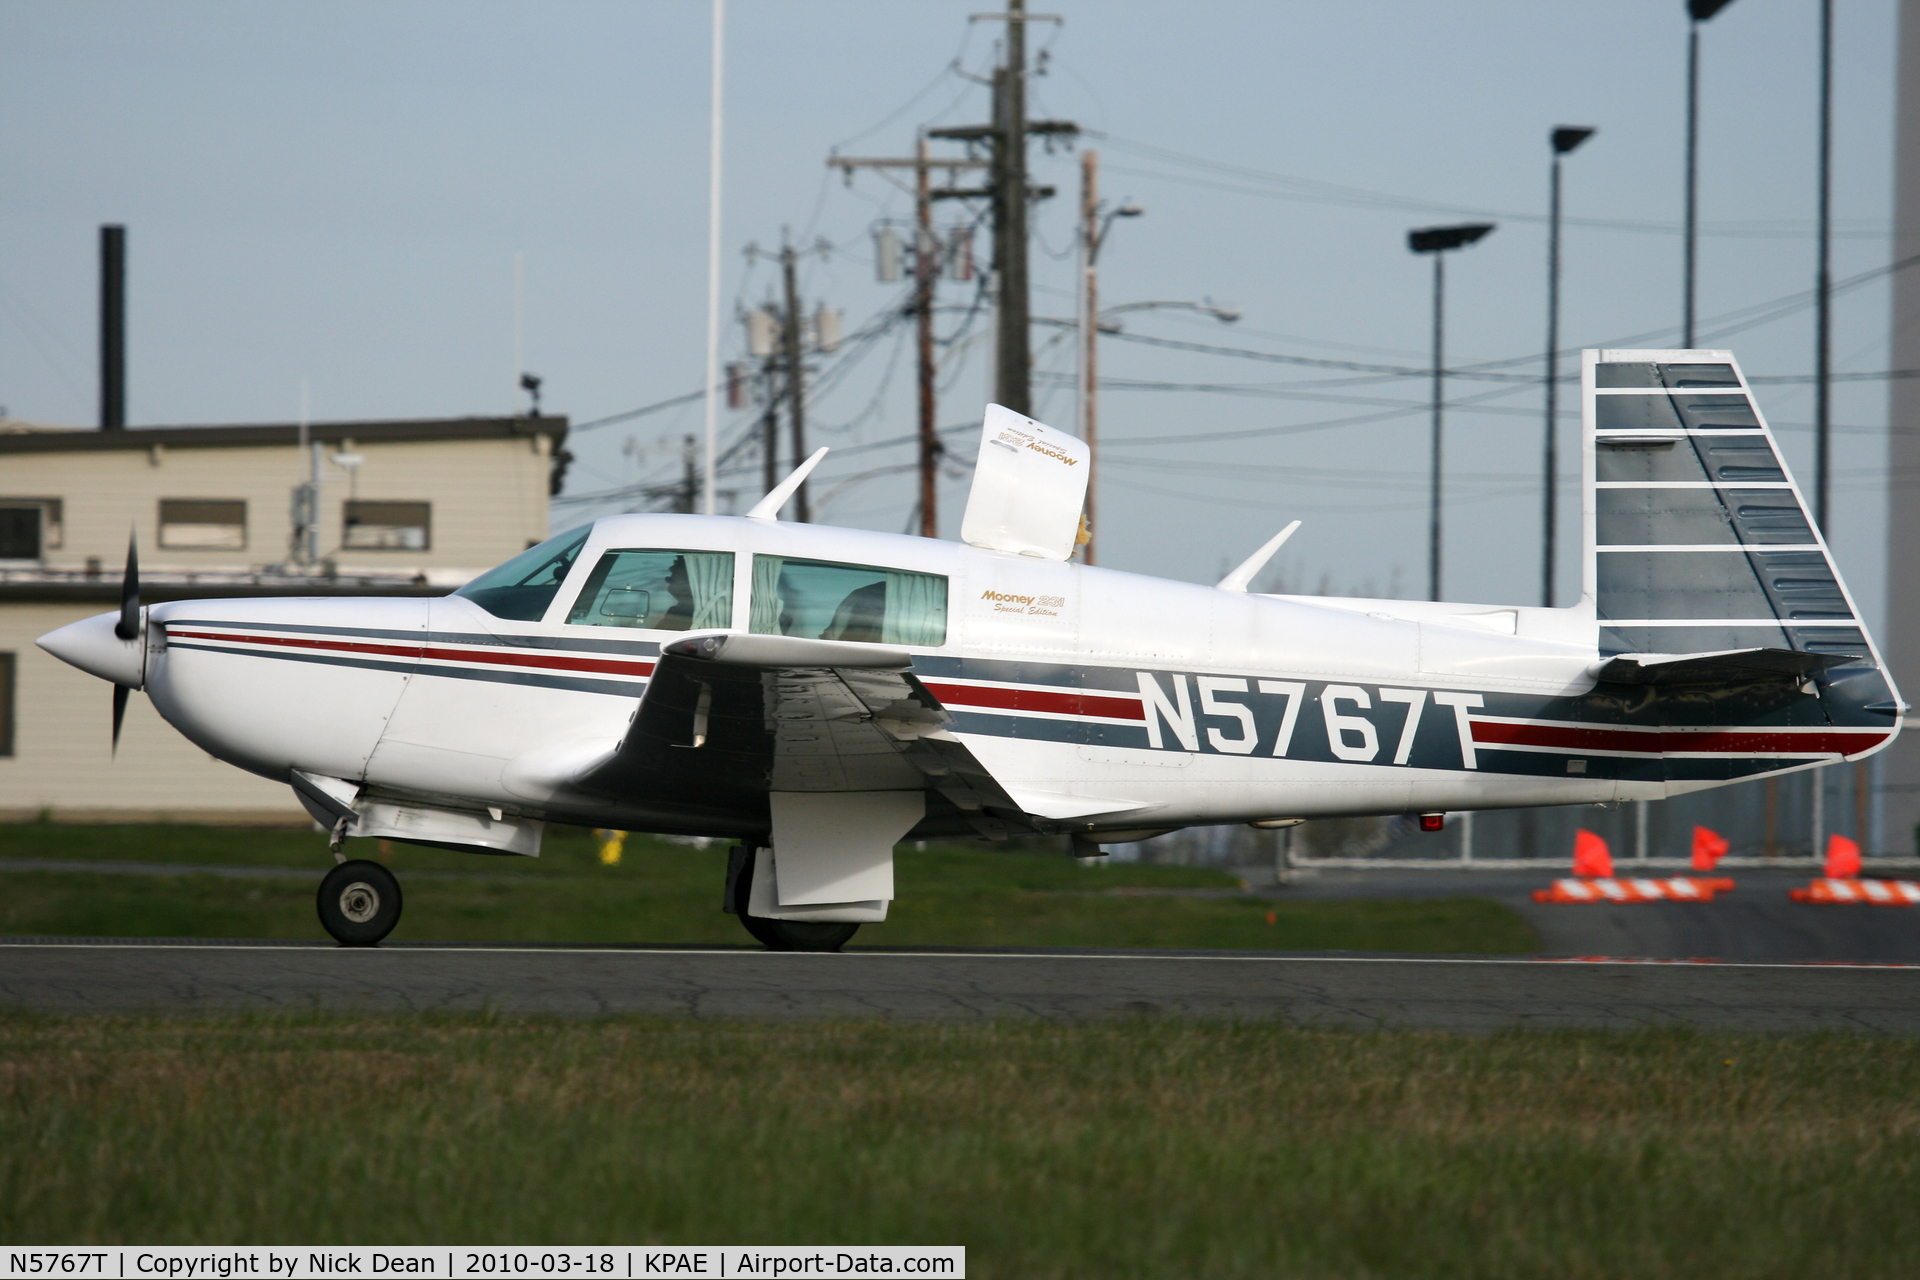 N5767T, 1984 Mooney M20K C/N 25-0838, KPAE A rapid return to the field after the baggage door came open on departure